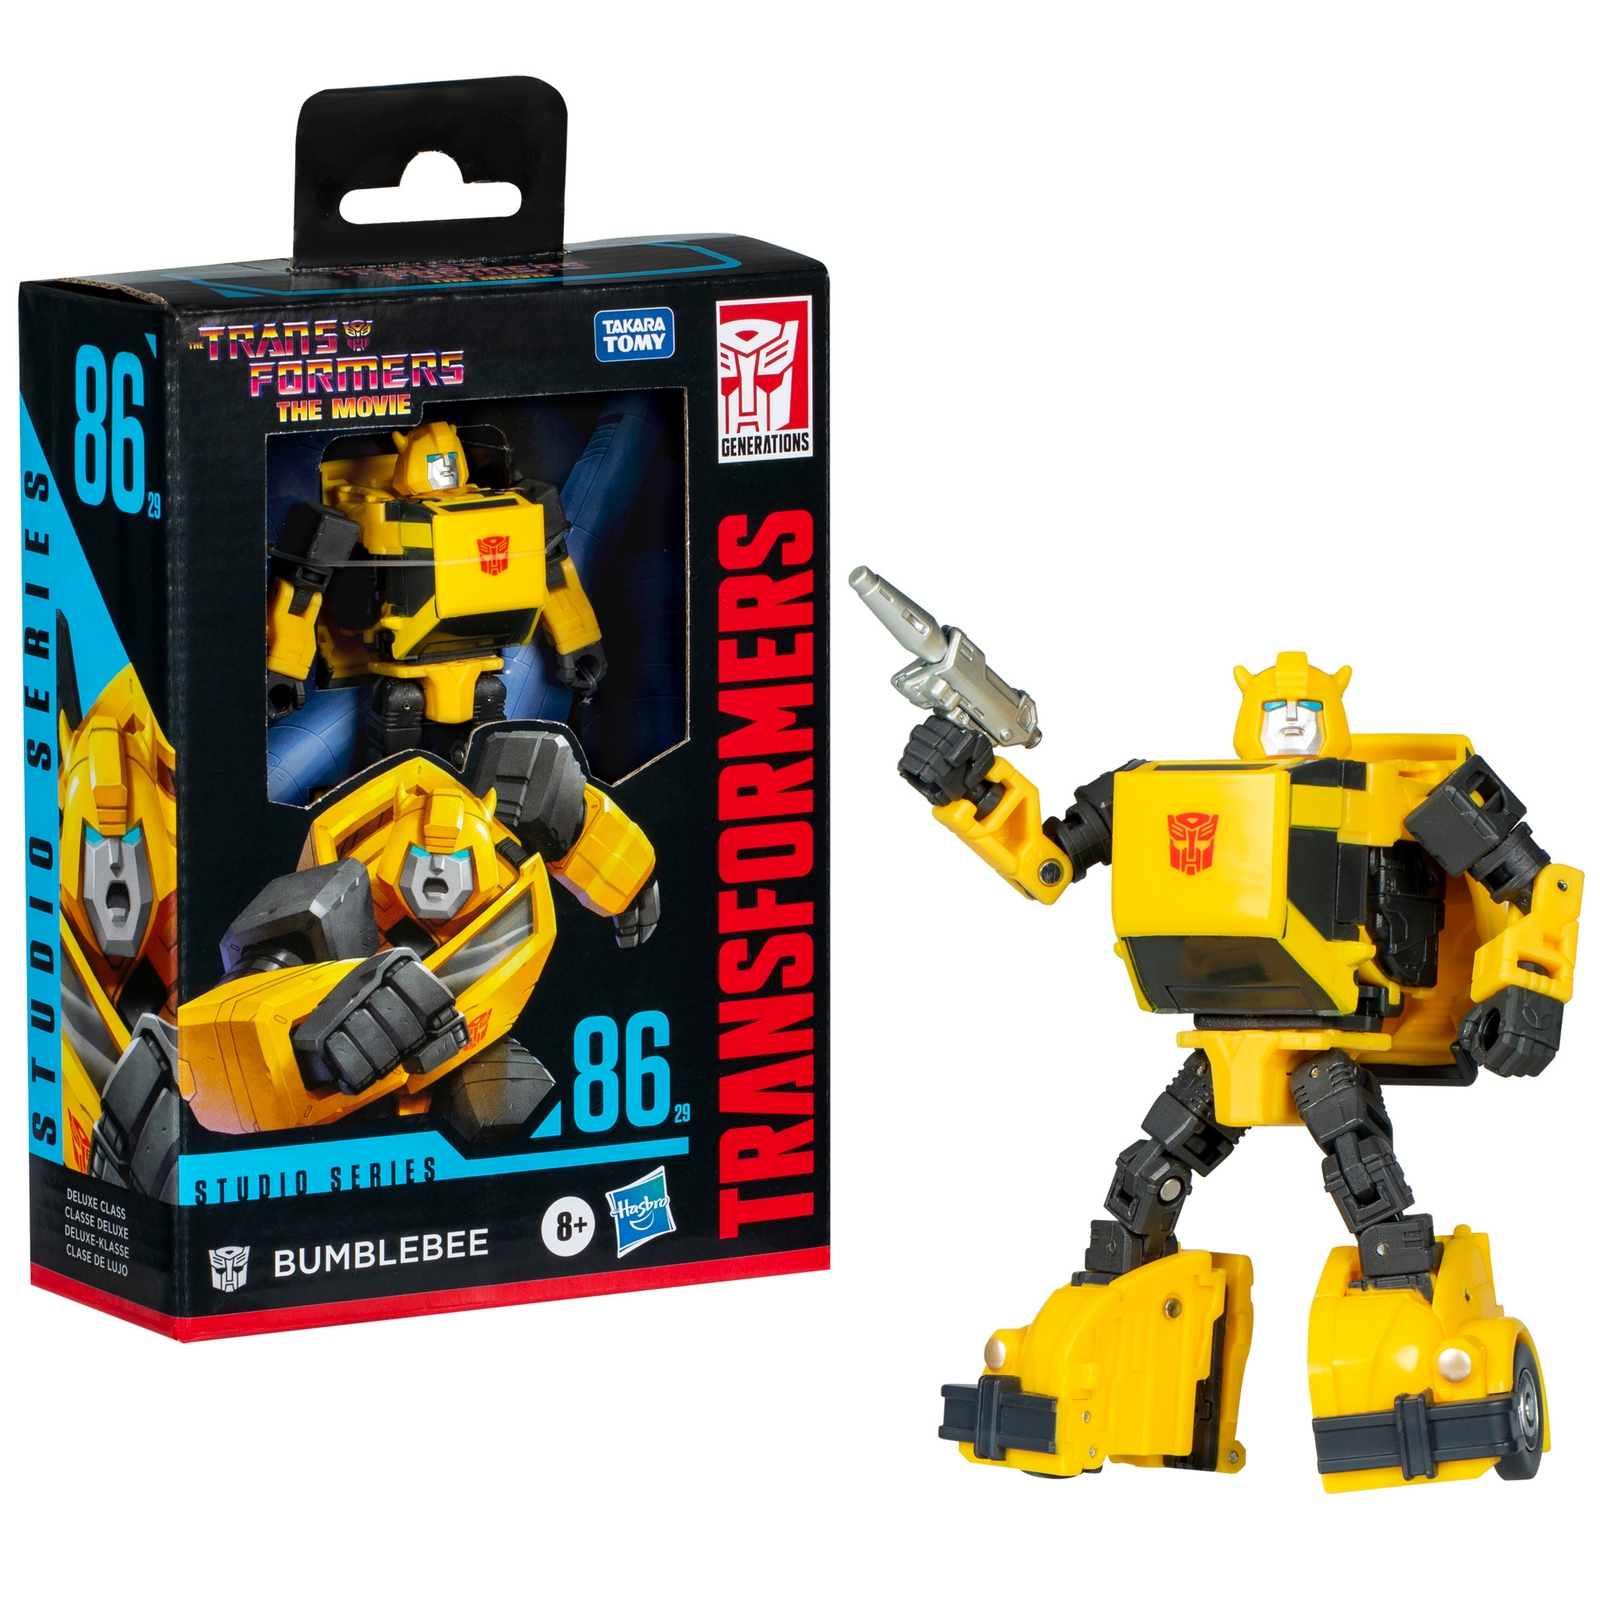 Hasbro Transformers Studio Series Deluxe The Transformers: The Movie 86-29 Bumblebee Action Figure